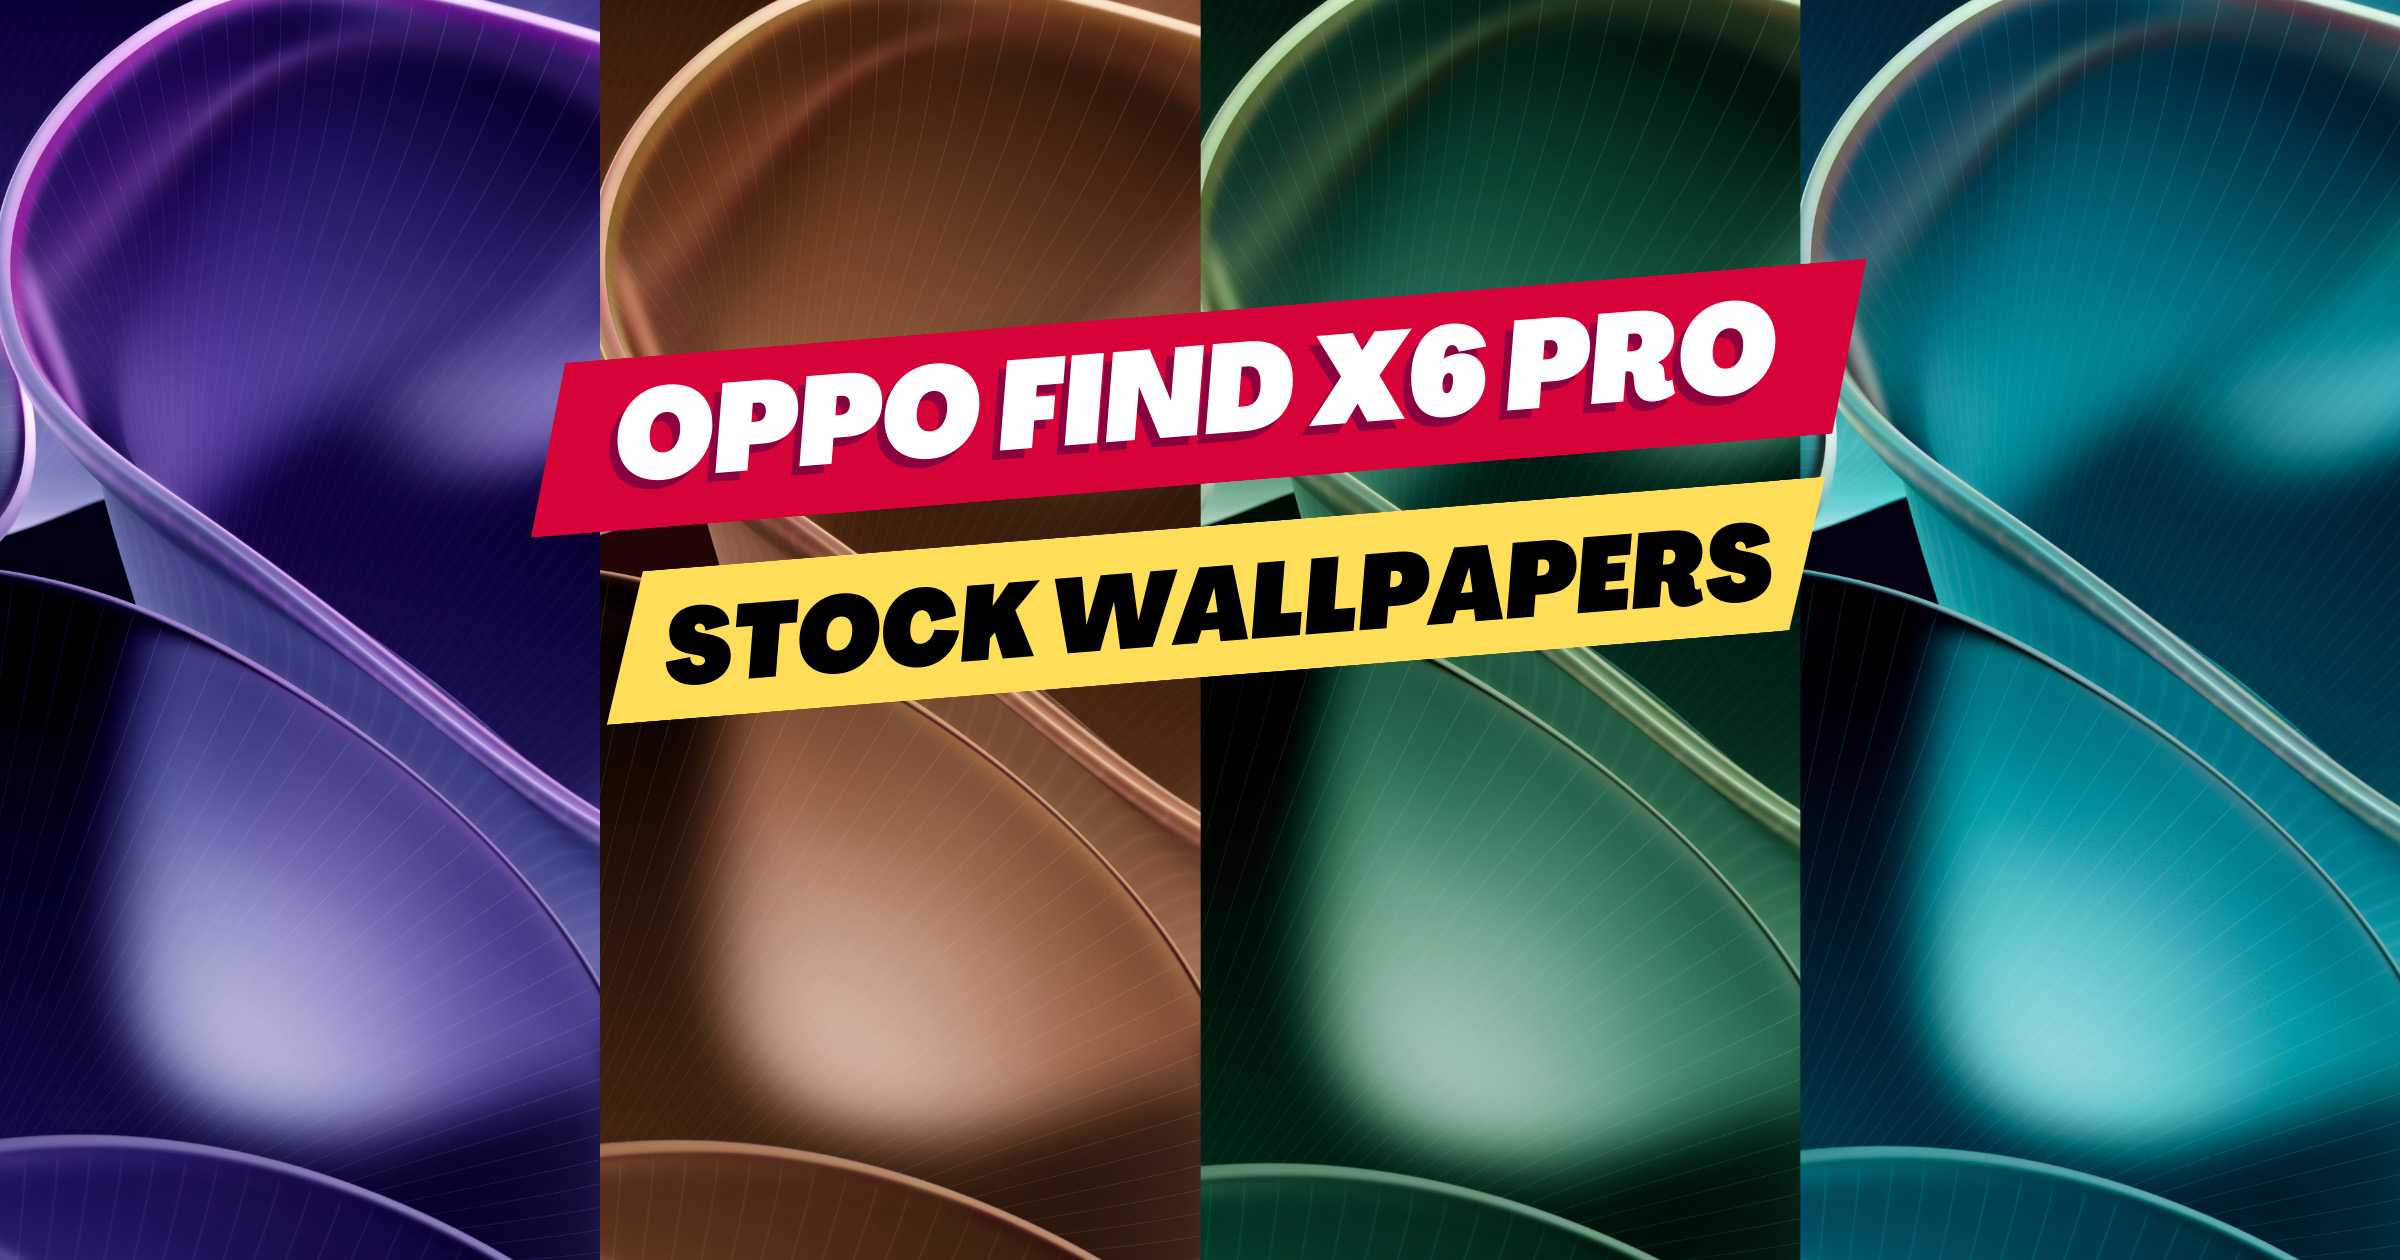 Download Oppo Find X6 Pro Stock Wallpapers